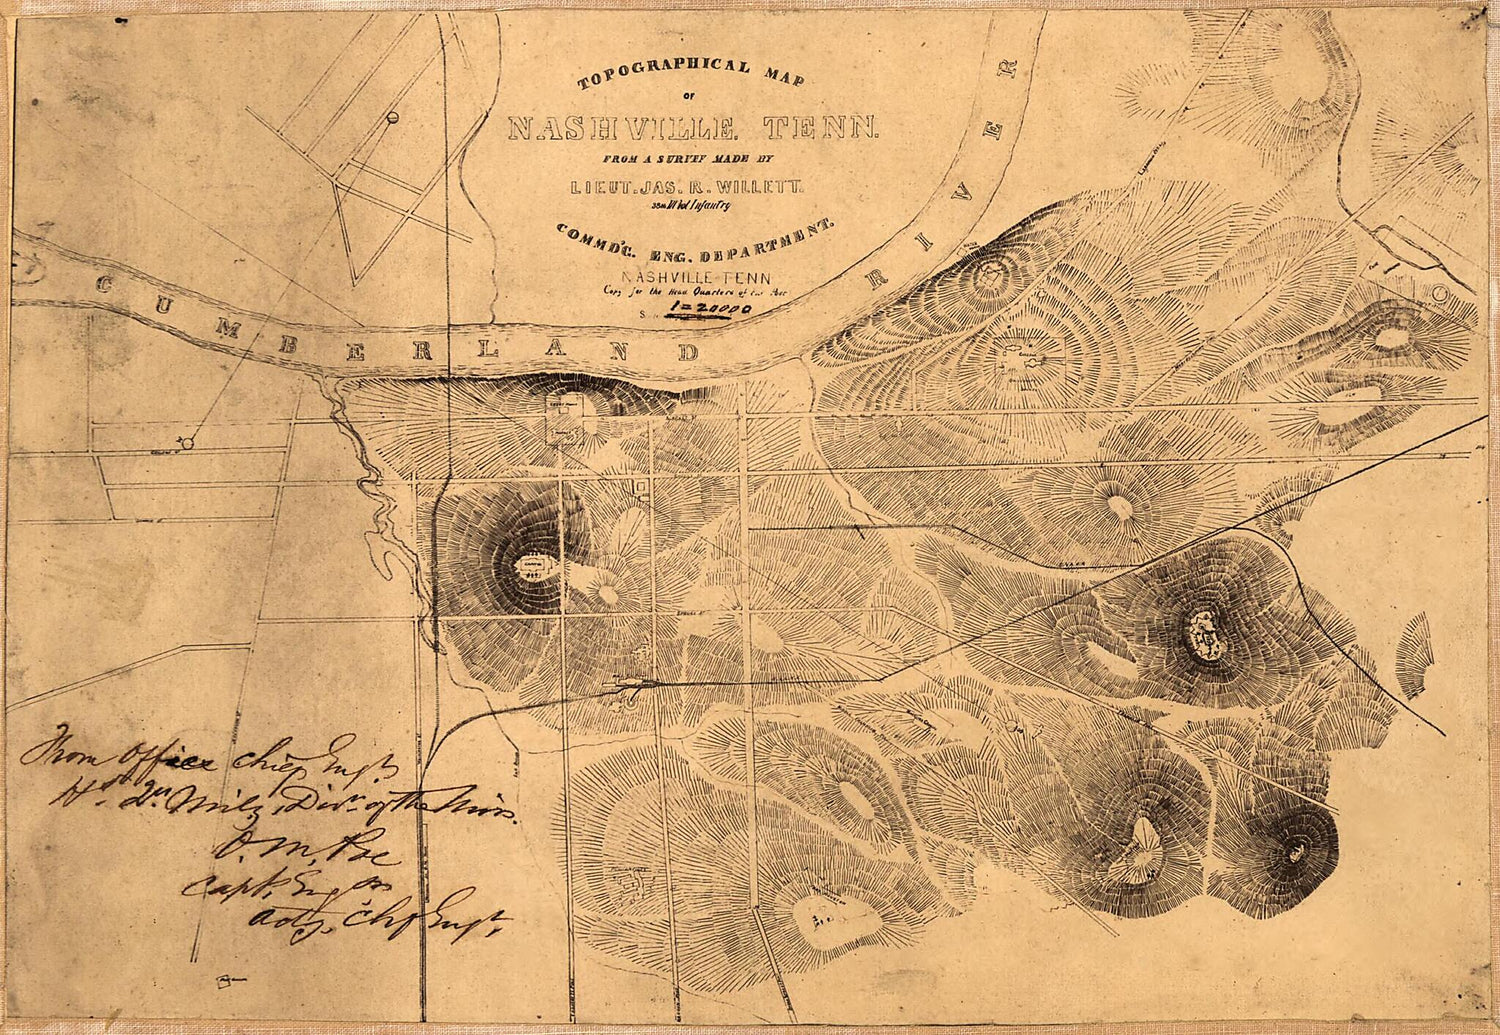 This old map of Topographical Map of Nashville, Tennessee from 1860 was created by O. M. (Orlando Metcalfe) Poe,  United States. Army. Military Division of the Mississippi. Chief Engrs. Office, James R. (James Rowland) Willett in 1860